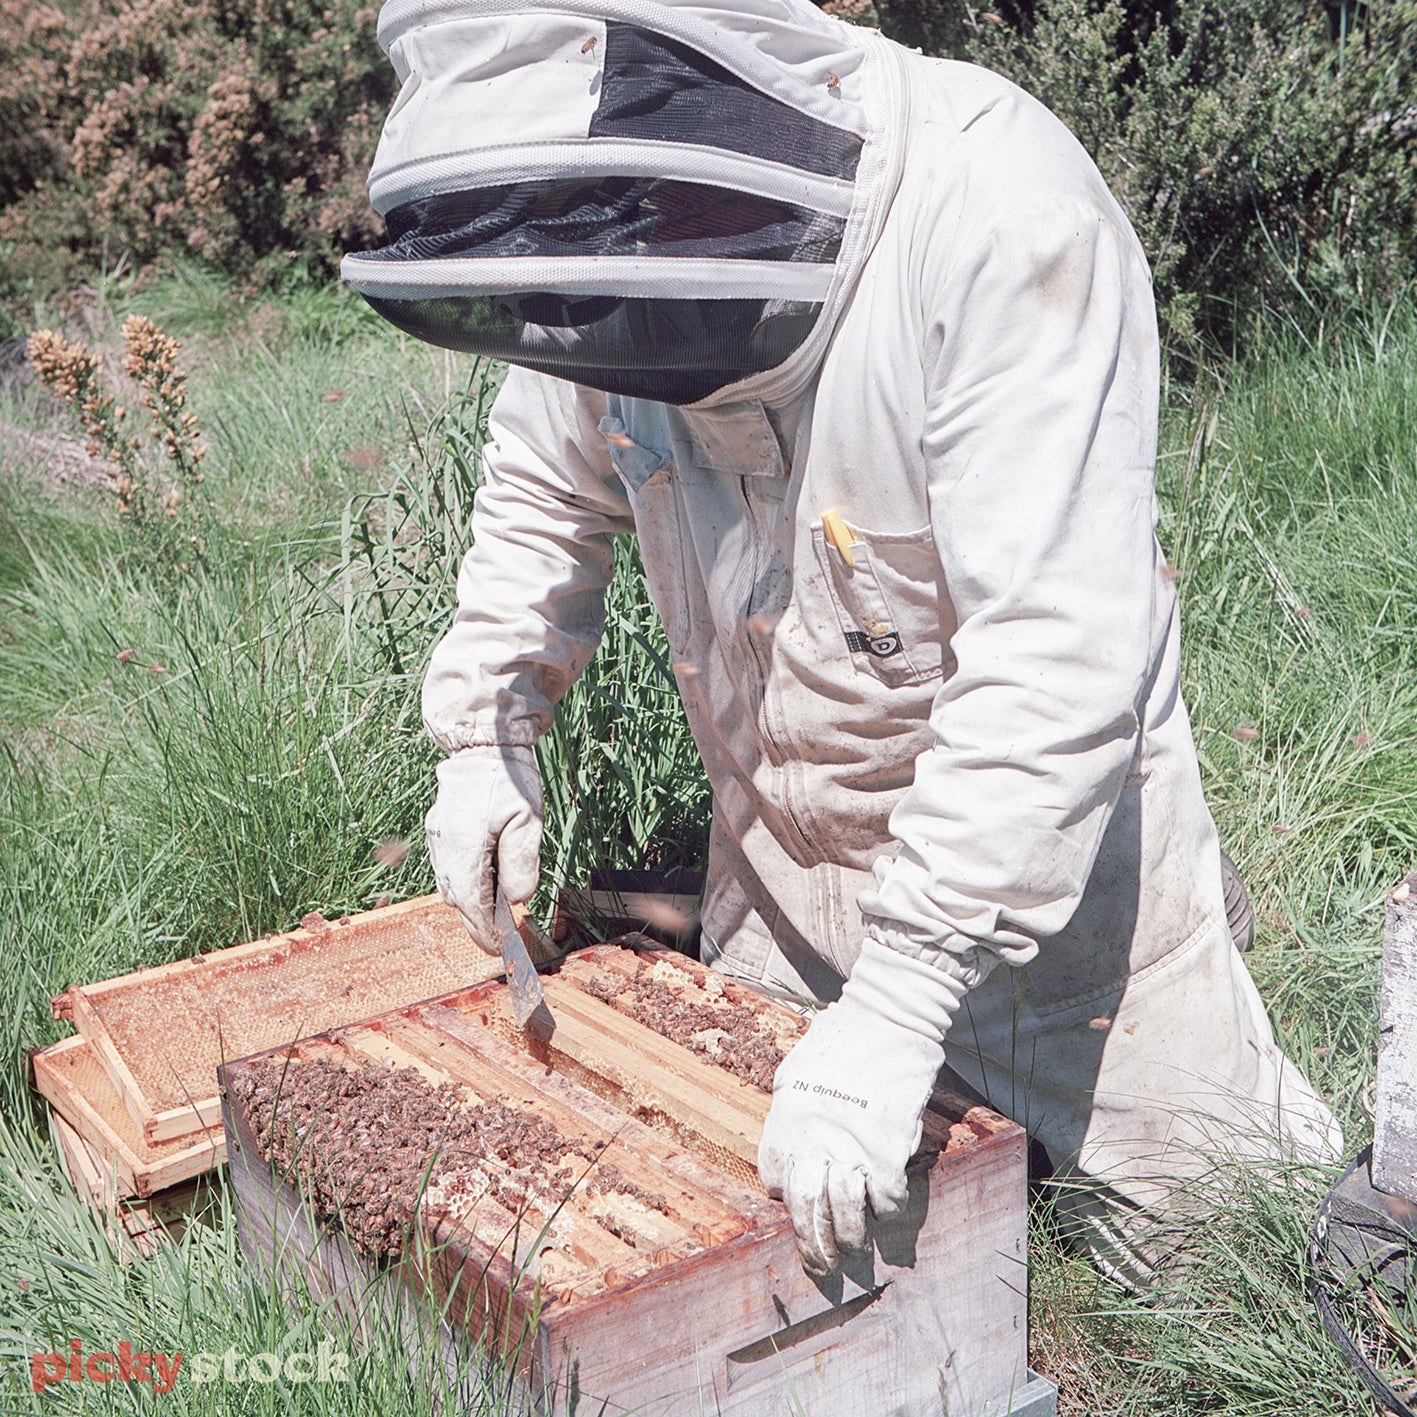 Beekeeper inspecting live beehive with scrapping tool.  Honeycomb is visible. Long grass in background. 